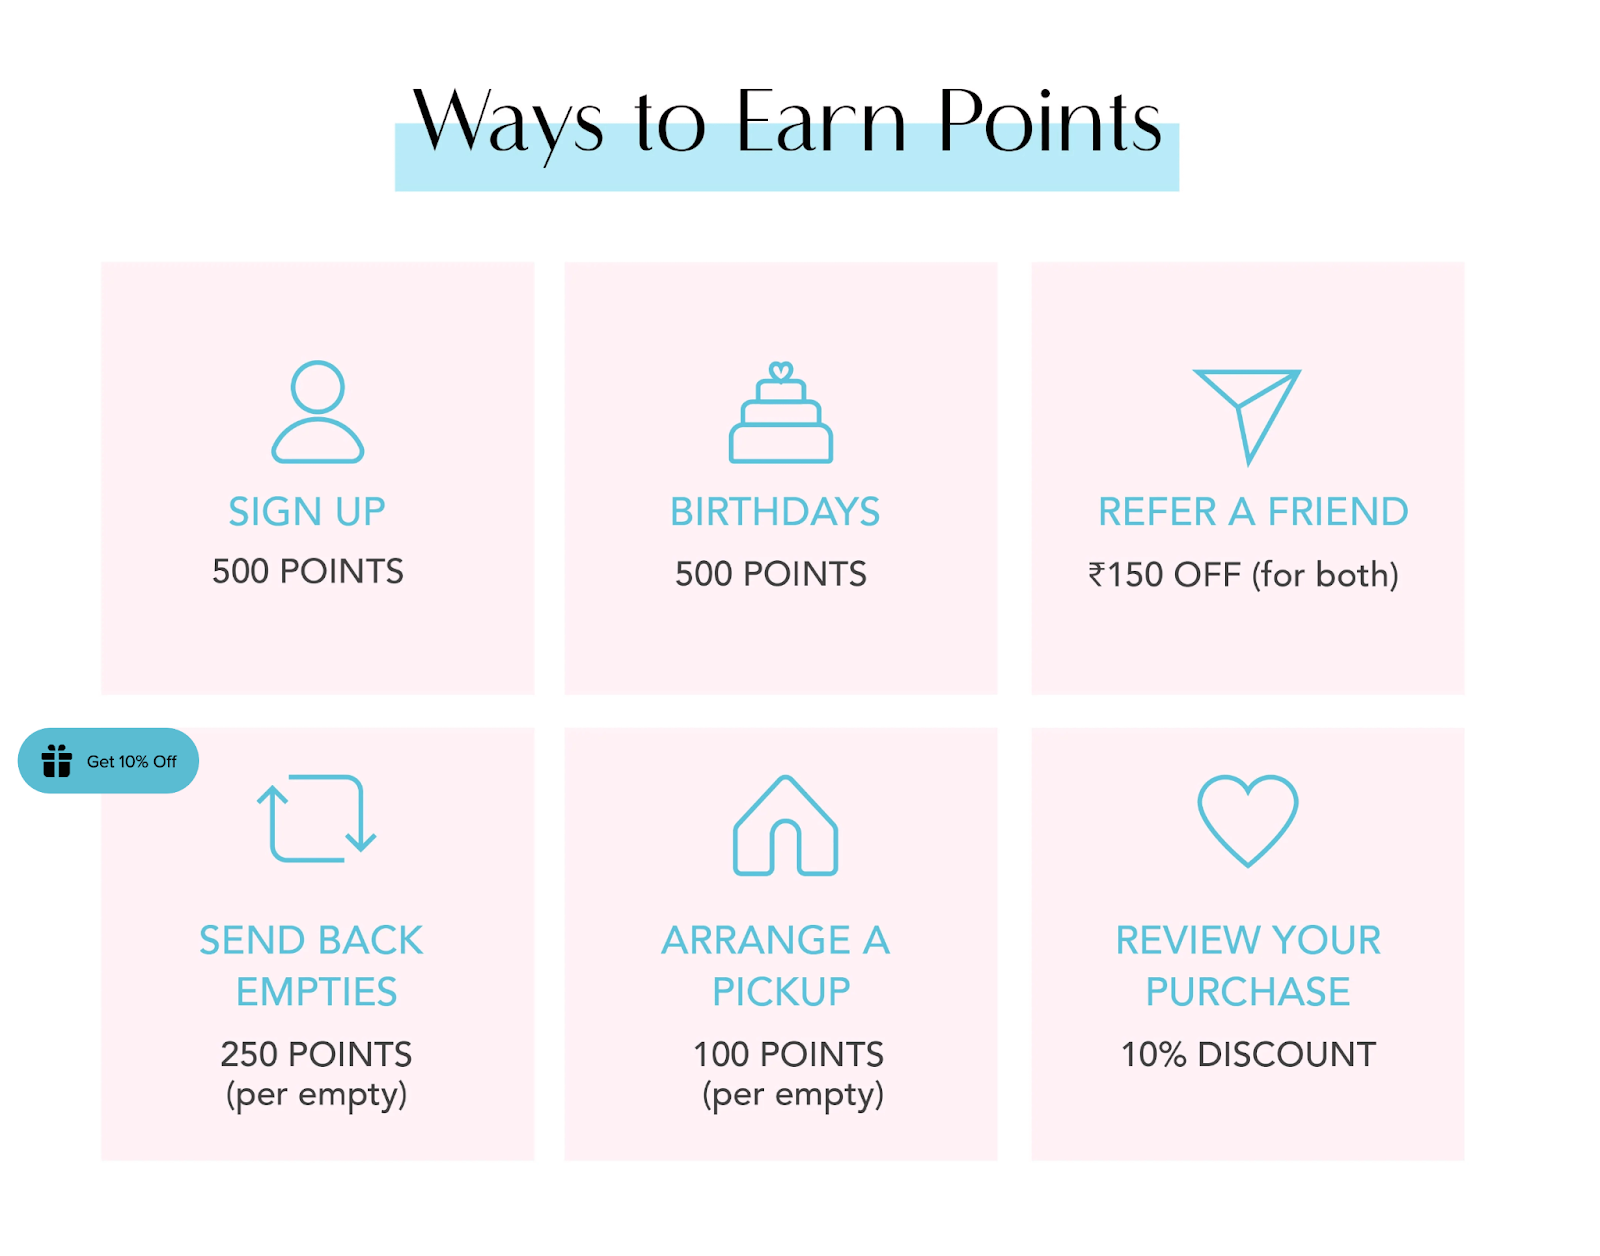 Top 10 Loyalty Programs 2022–A screenshot from Sublime Life’s rewards program explainer page showing the different ways to earn points. There are 6 pink boxes with blue icons and text in each of them explaining the different points earning actions and their values. They are: a person icon for ‘Sign Up. 500 points’, a cake icon for ‘Birthdays. 500 points’, a paper airplane icon for ‘Refer a friend. ₹150 off (for both)’, a recycling arrow icon for ‘Send back empties. 250 points (per empty)’, a house icon for ‘Arrange a pickup. 100 points (per empty)’, and a heart icon for ‘Review your purchase. 10% discount.’ 